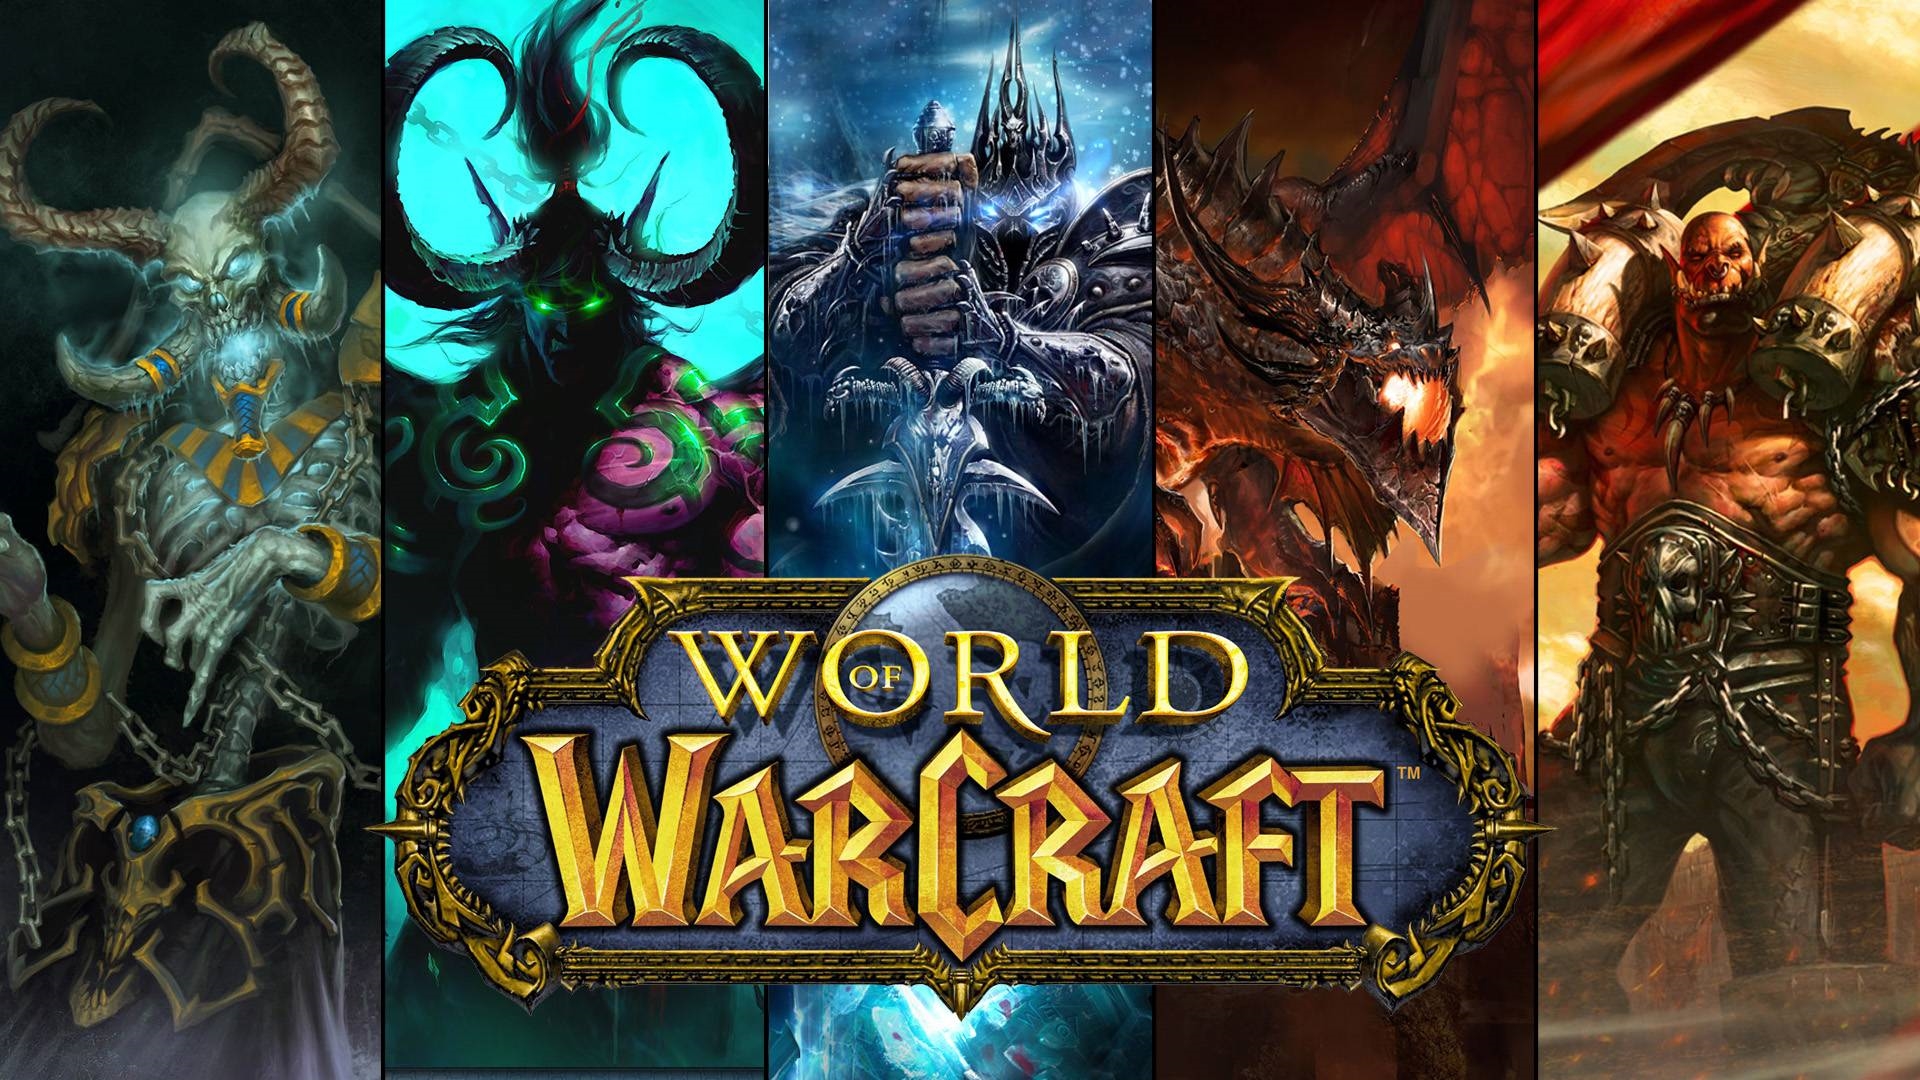 World Of Warcraft: Warlords Of Draenor #1